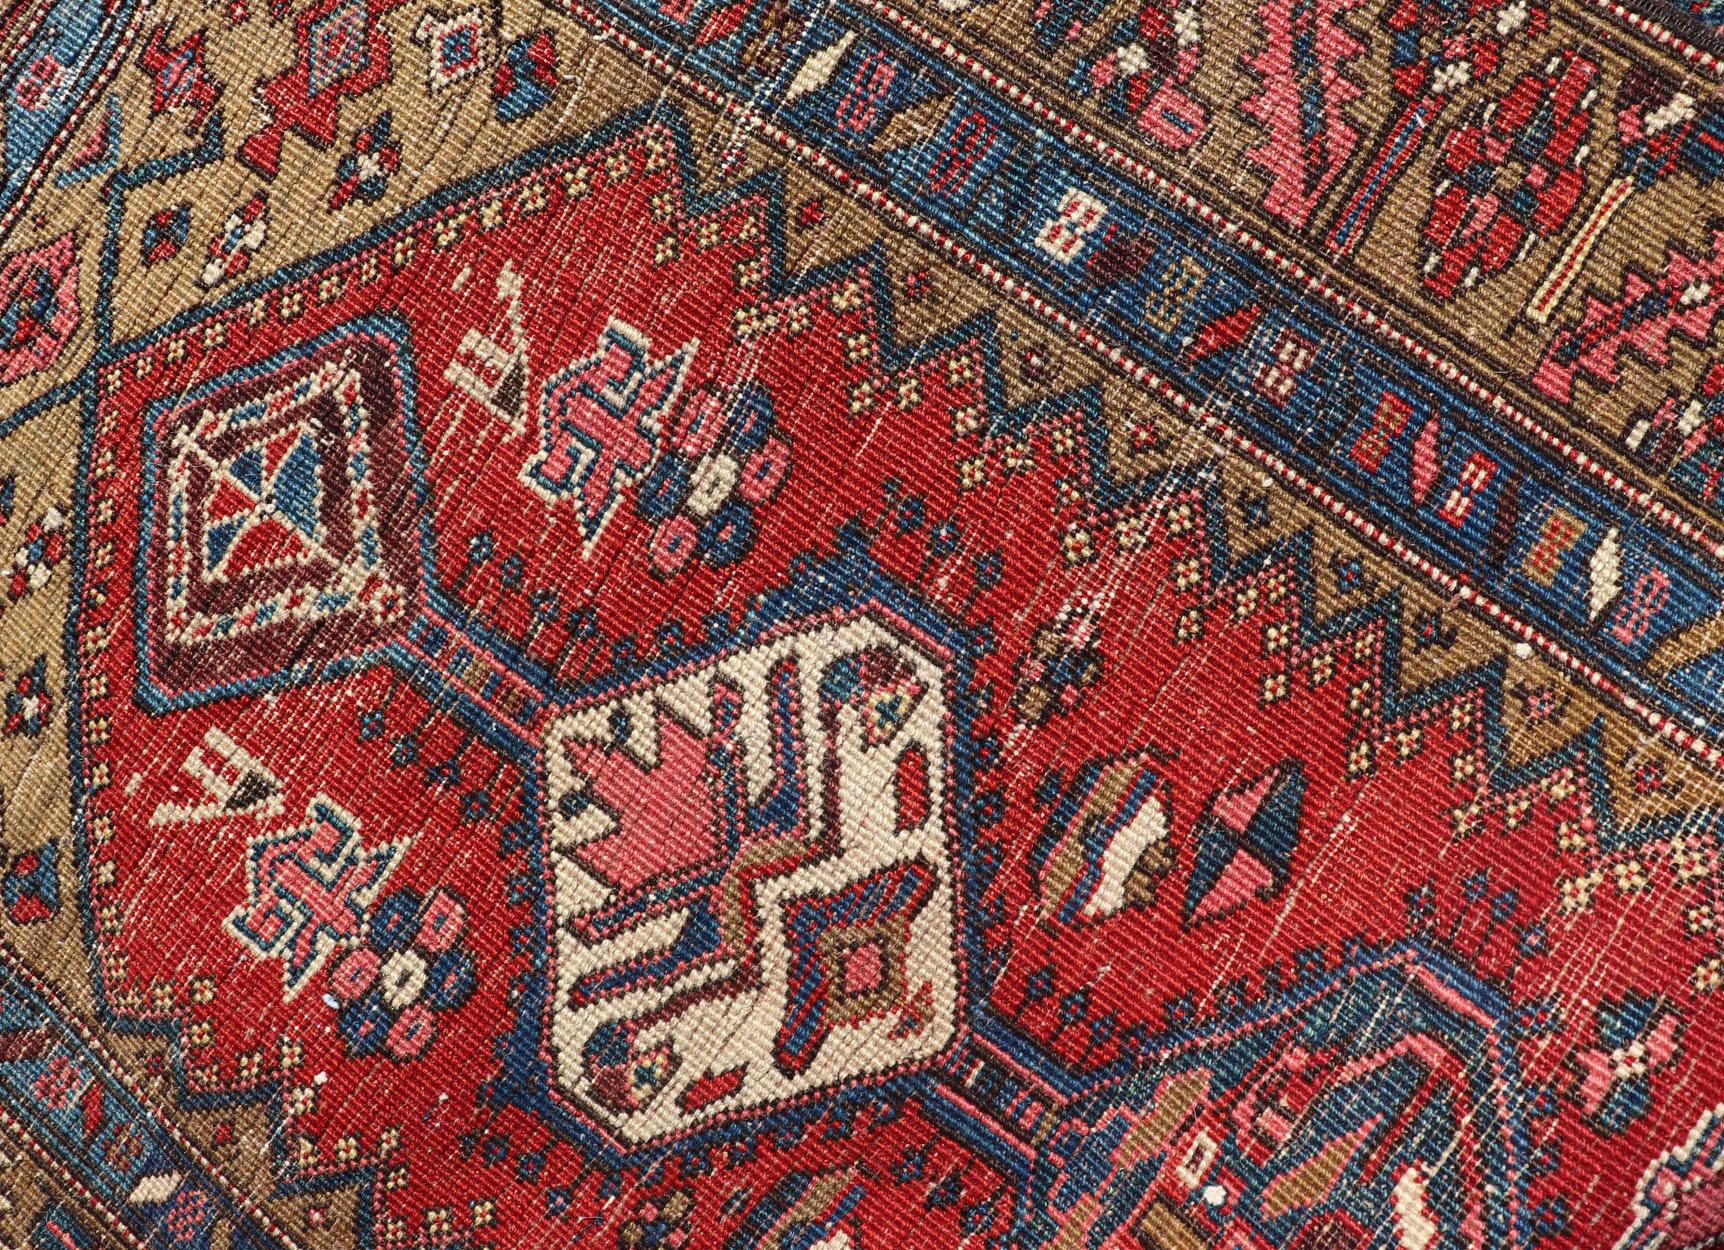 Antique Persian Heriz Runner in Reds, Blues, Pink, Ivory and Earthy Tones For Sale 6